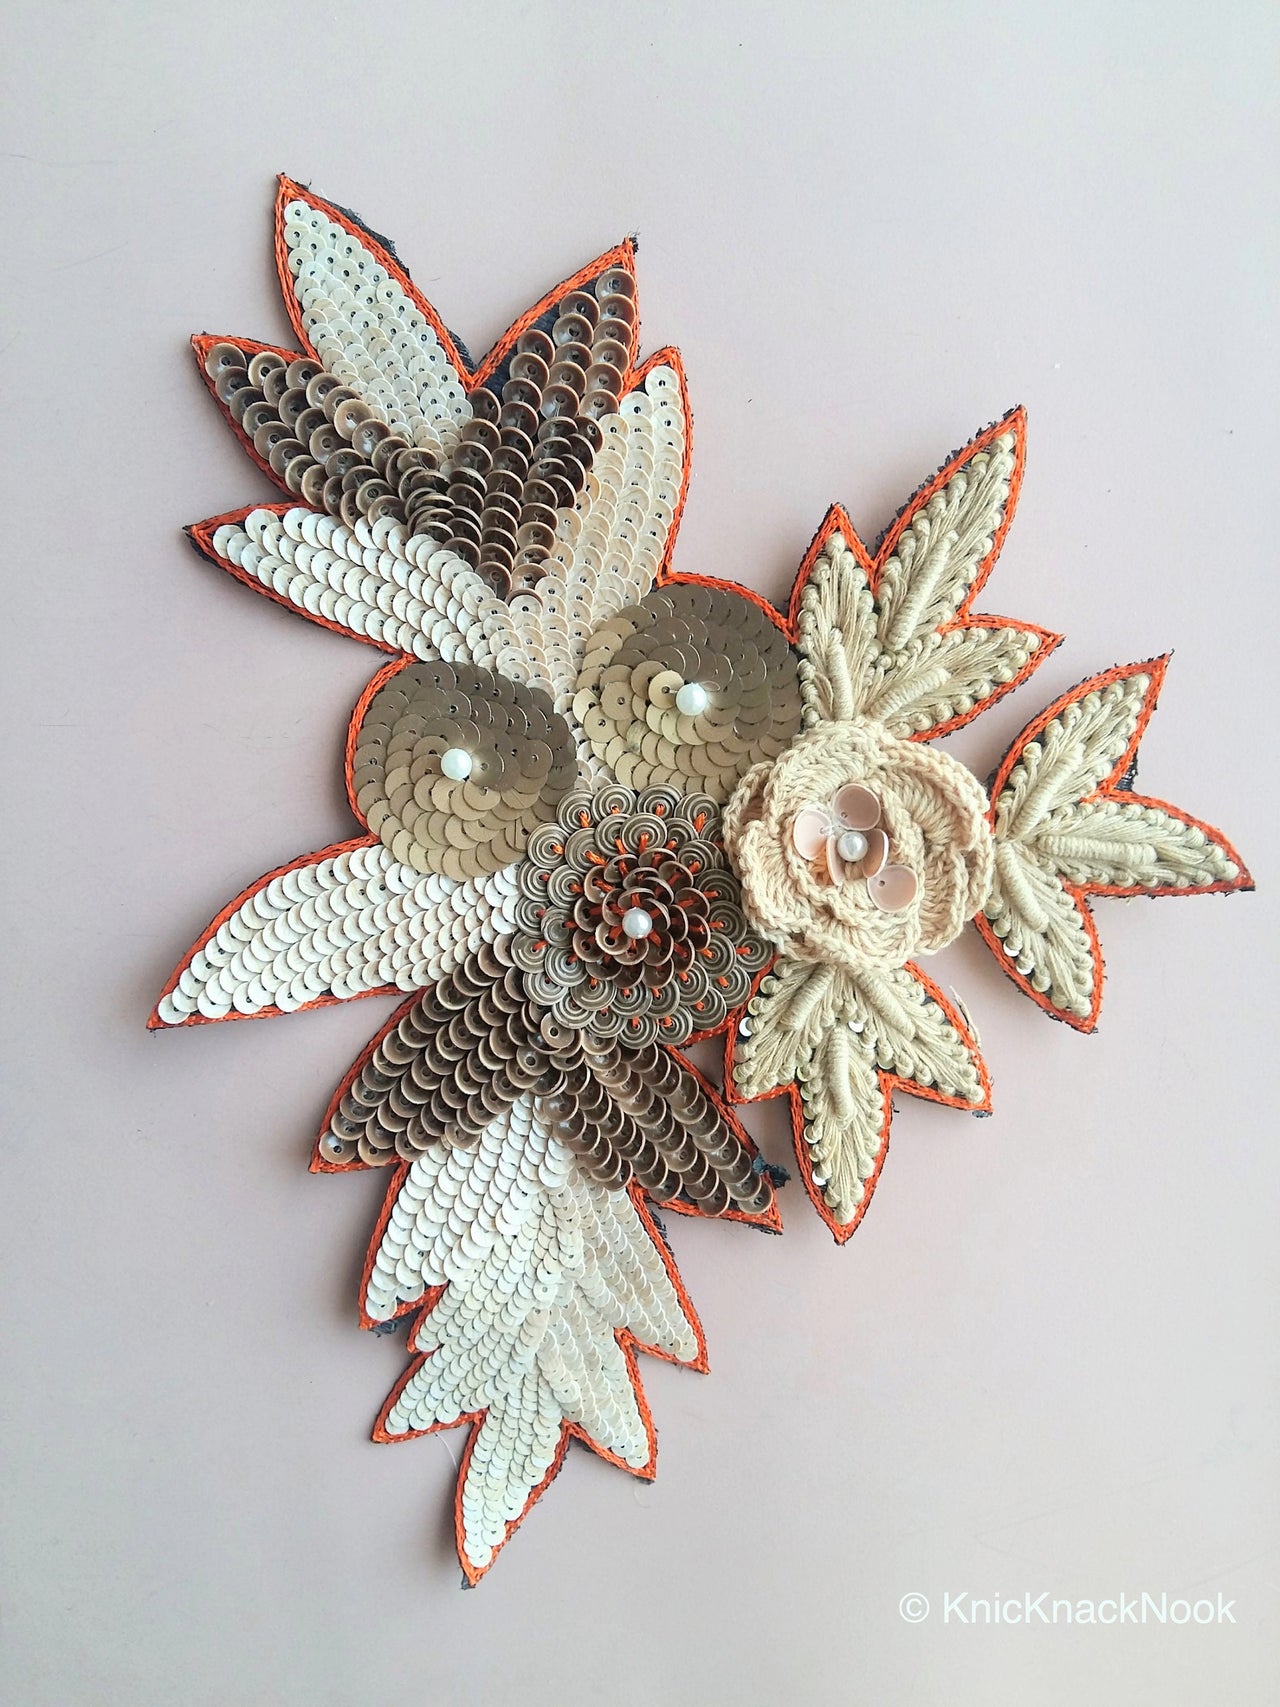 Floral Applique With Beige And Orange / Blue Embroidery, Beige, Brown And Bronze Sequins And White Pearl Beads